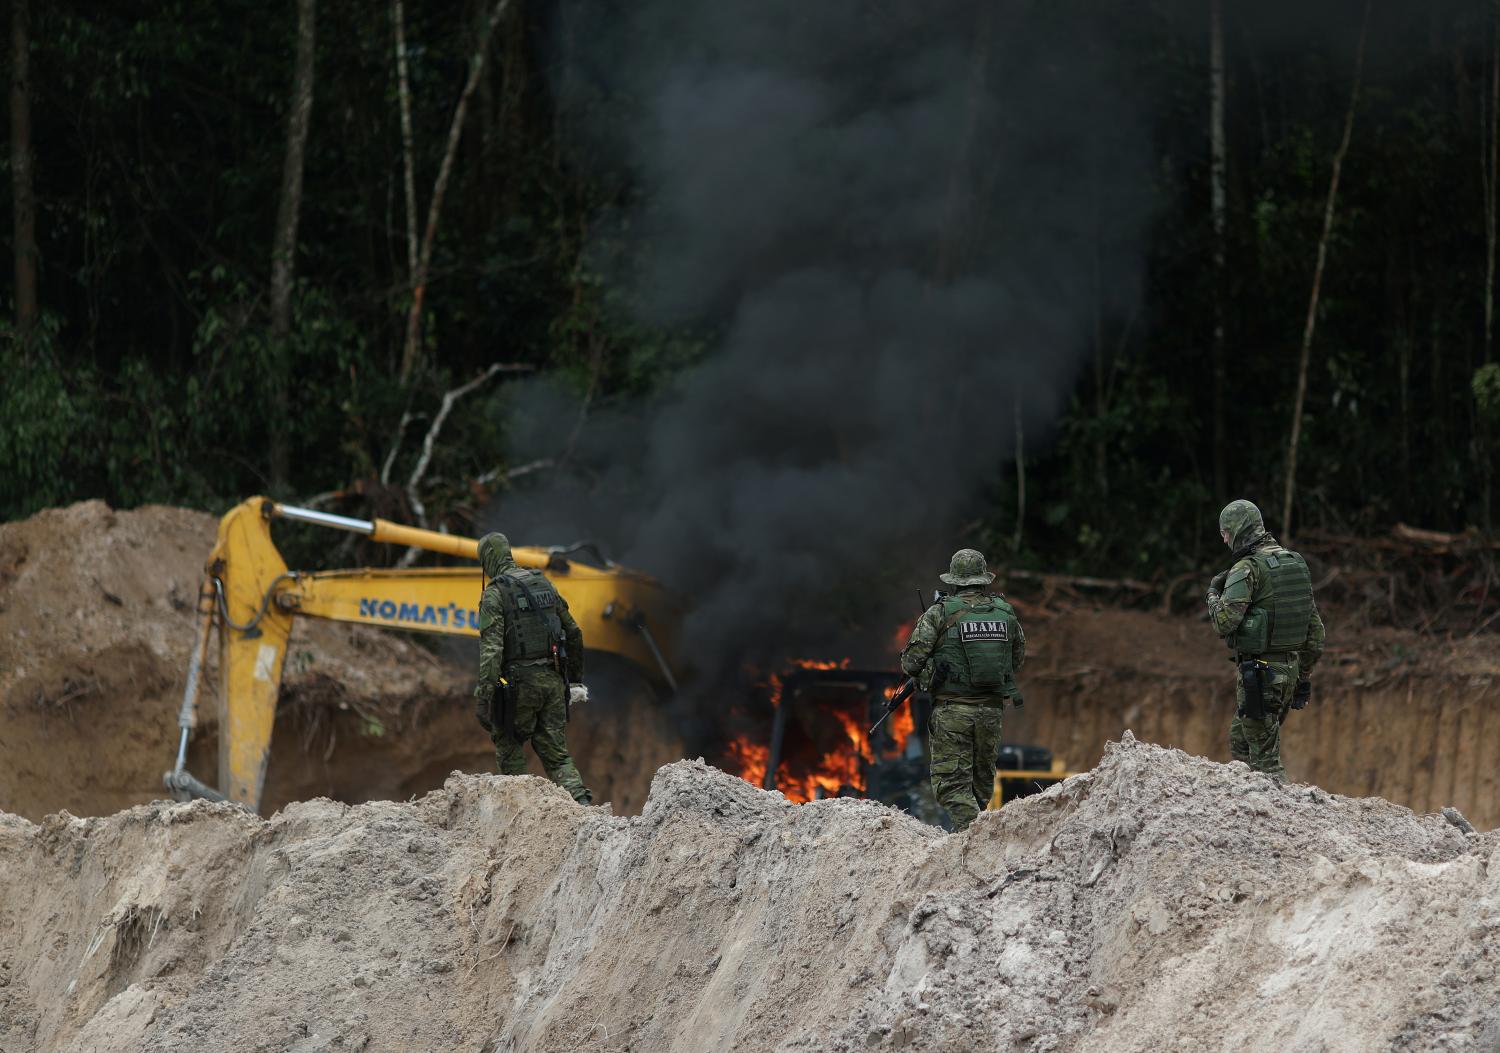 Machines are destroyed at an illegal gold mine during an operation conducted by agents of the Brazilian Institute for the Environment and Renewable Natural Resources, or Ibama, in national parks near Novo Progresso, southeast of Para state, Brazil, November 5, 2018. REUTERS/Ricardo Moraes